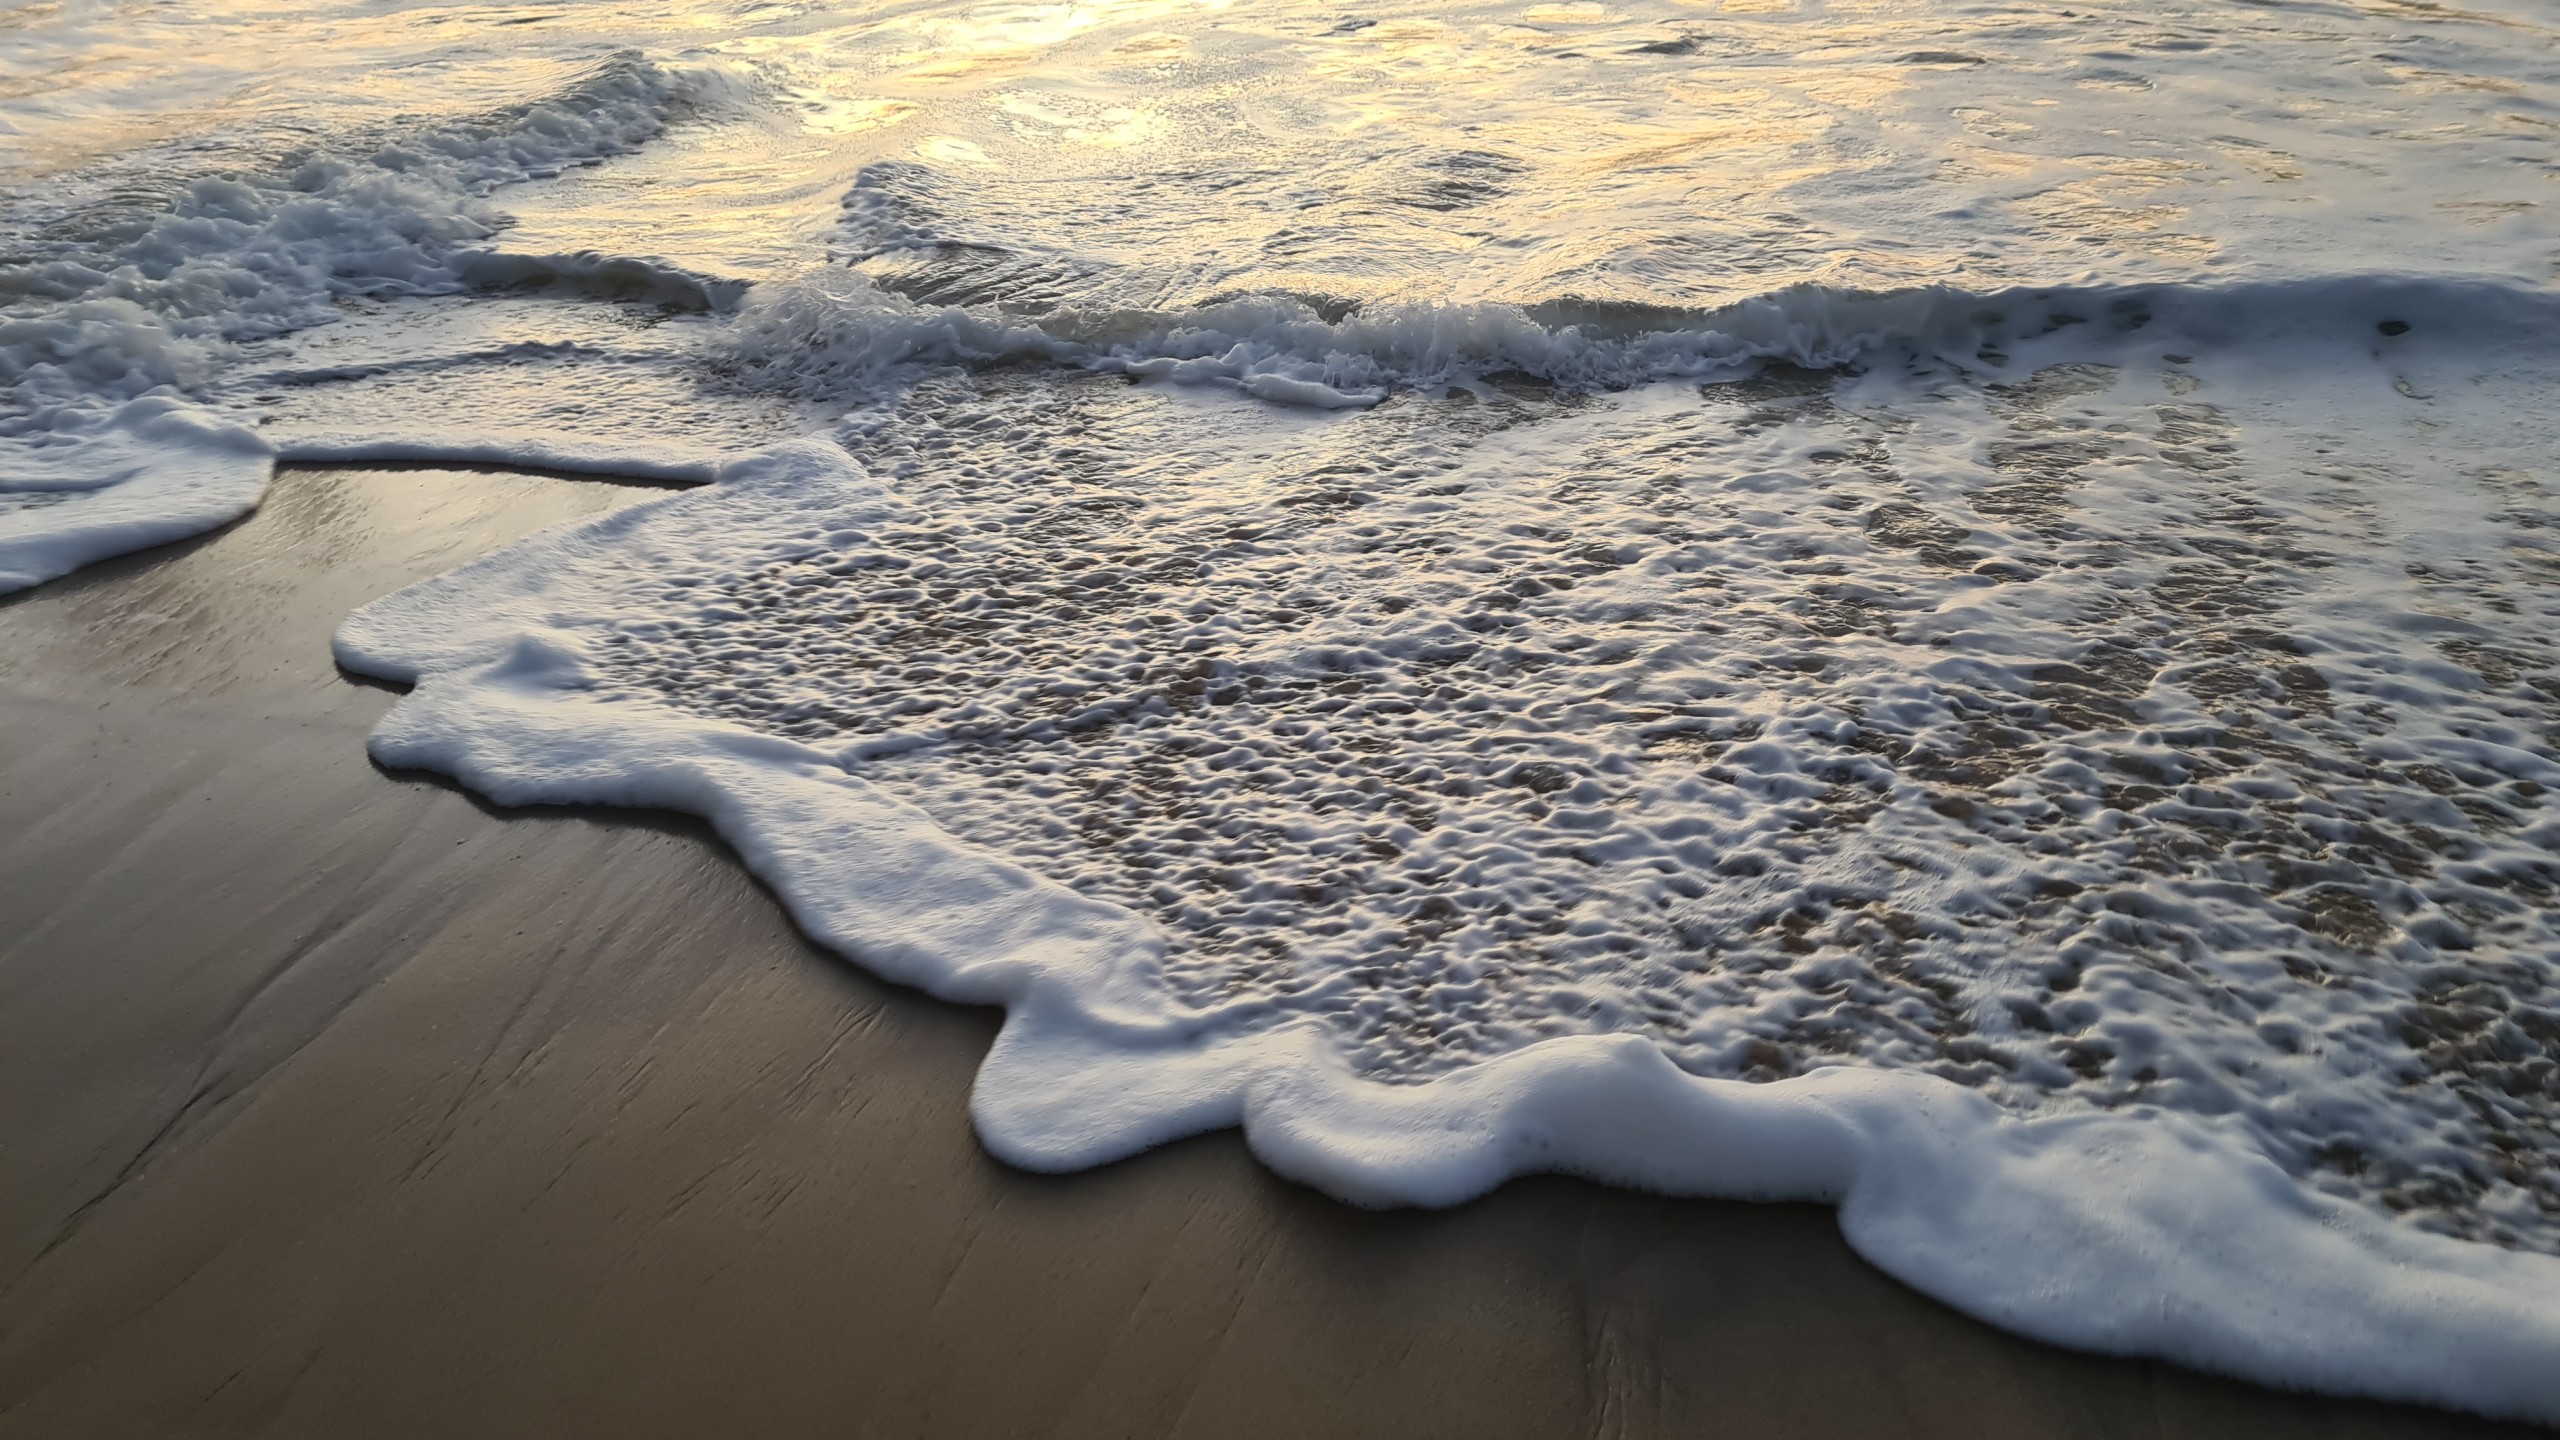 Denise Batchelor, Hokianga Nui a Kupe, from the series Hukatai ~ Sea foam, 2022–2023. Part of a collaboration towards an installation with Maureen Lander.